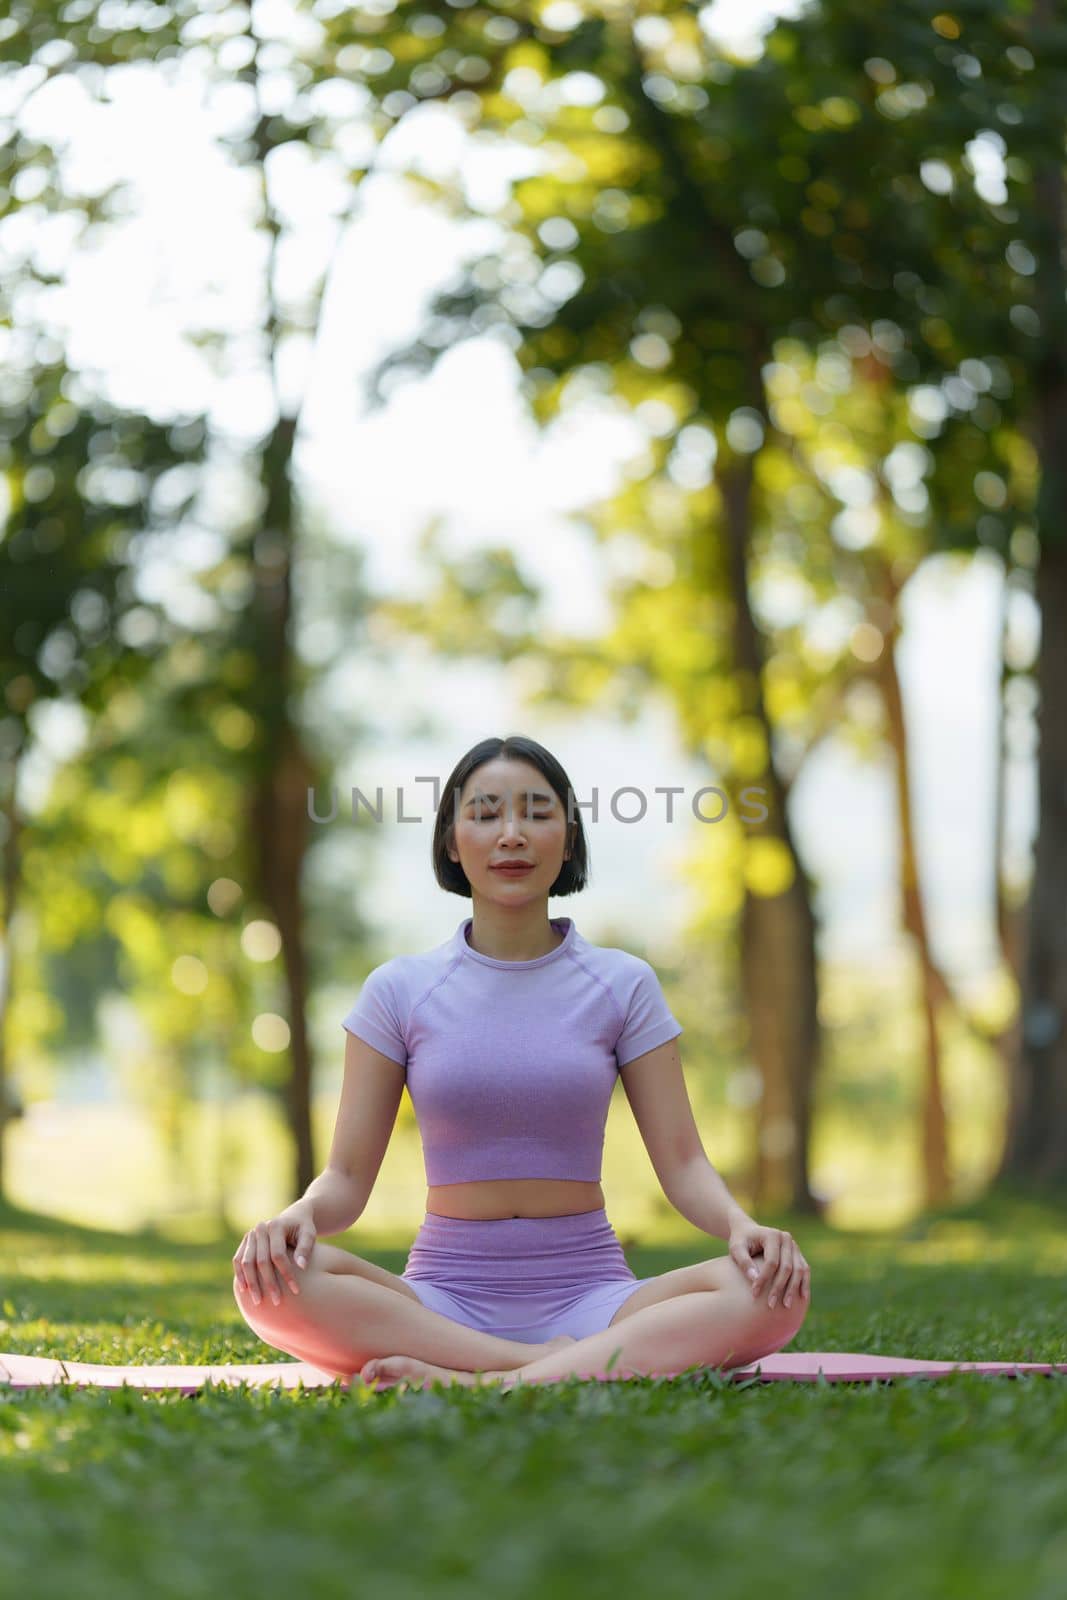 Attractive Asian woman in sportswear practicing yoga in the outdoor park.